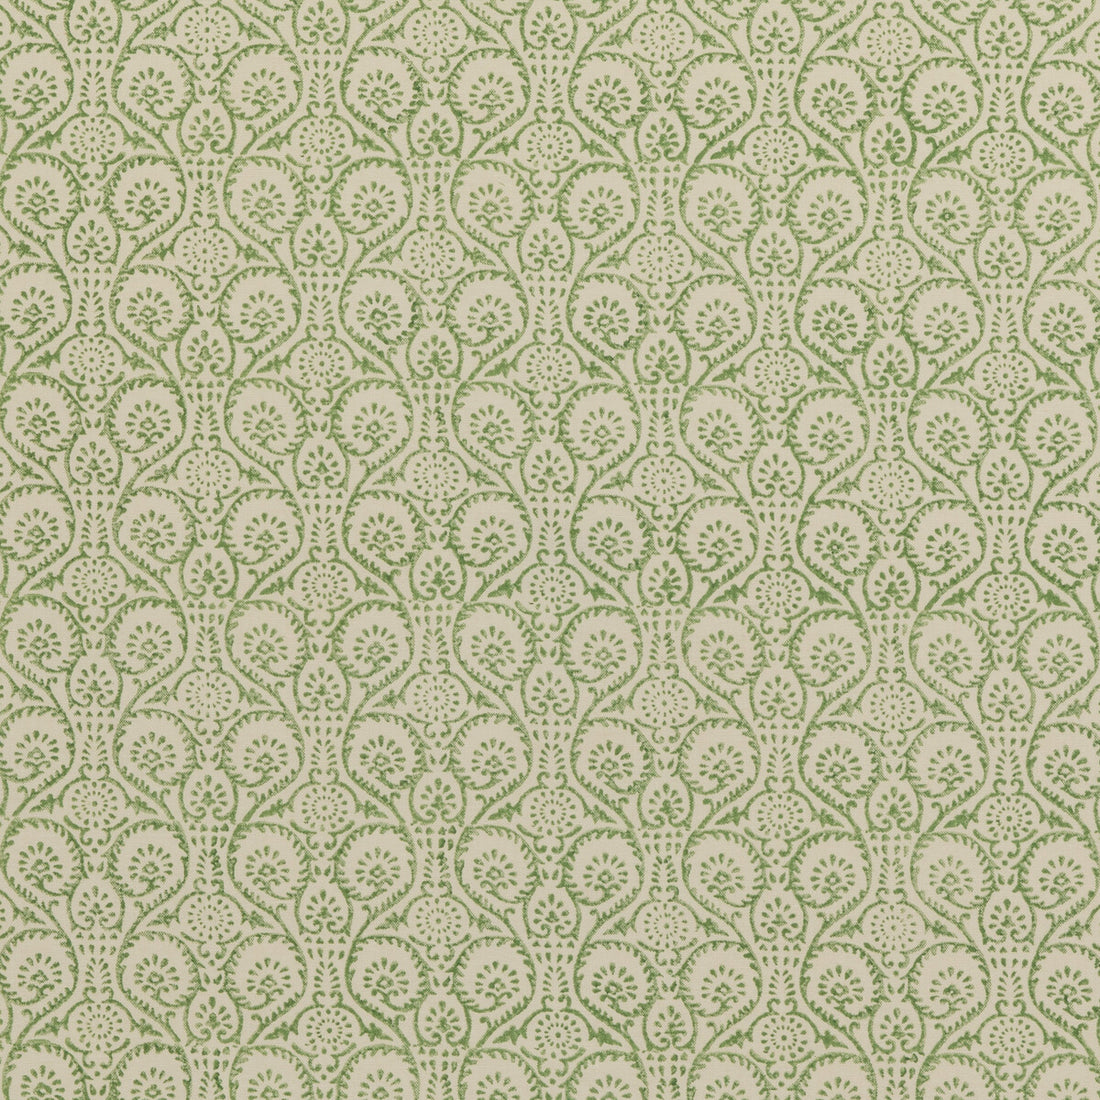 Pollen Trail fabric in green color - pattern PP50481.5.0 - by Baker Lifestyle in the Block Party collection